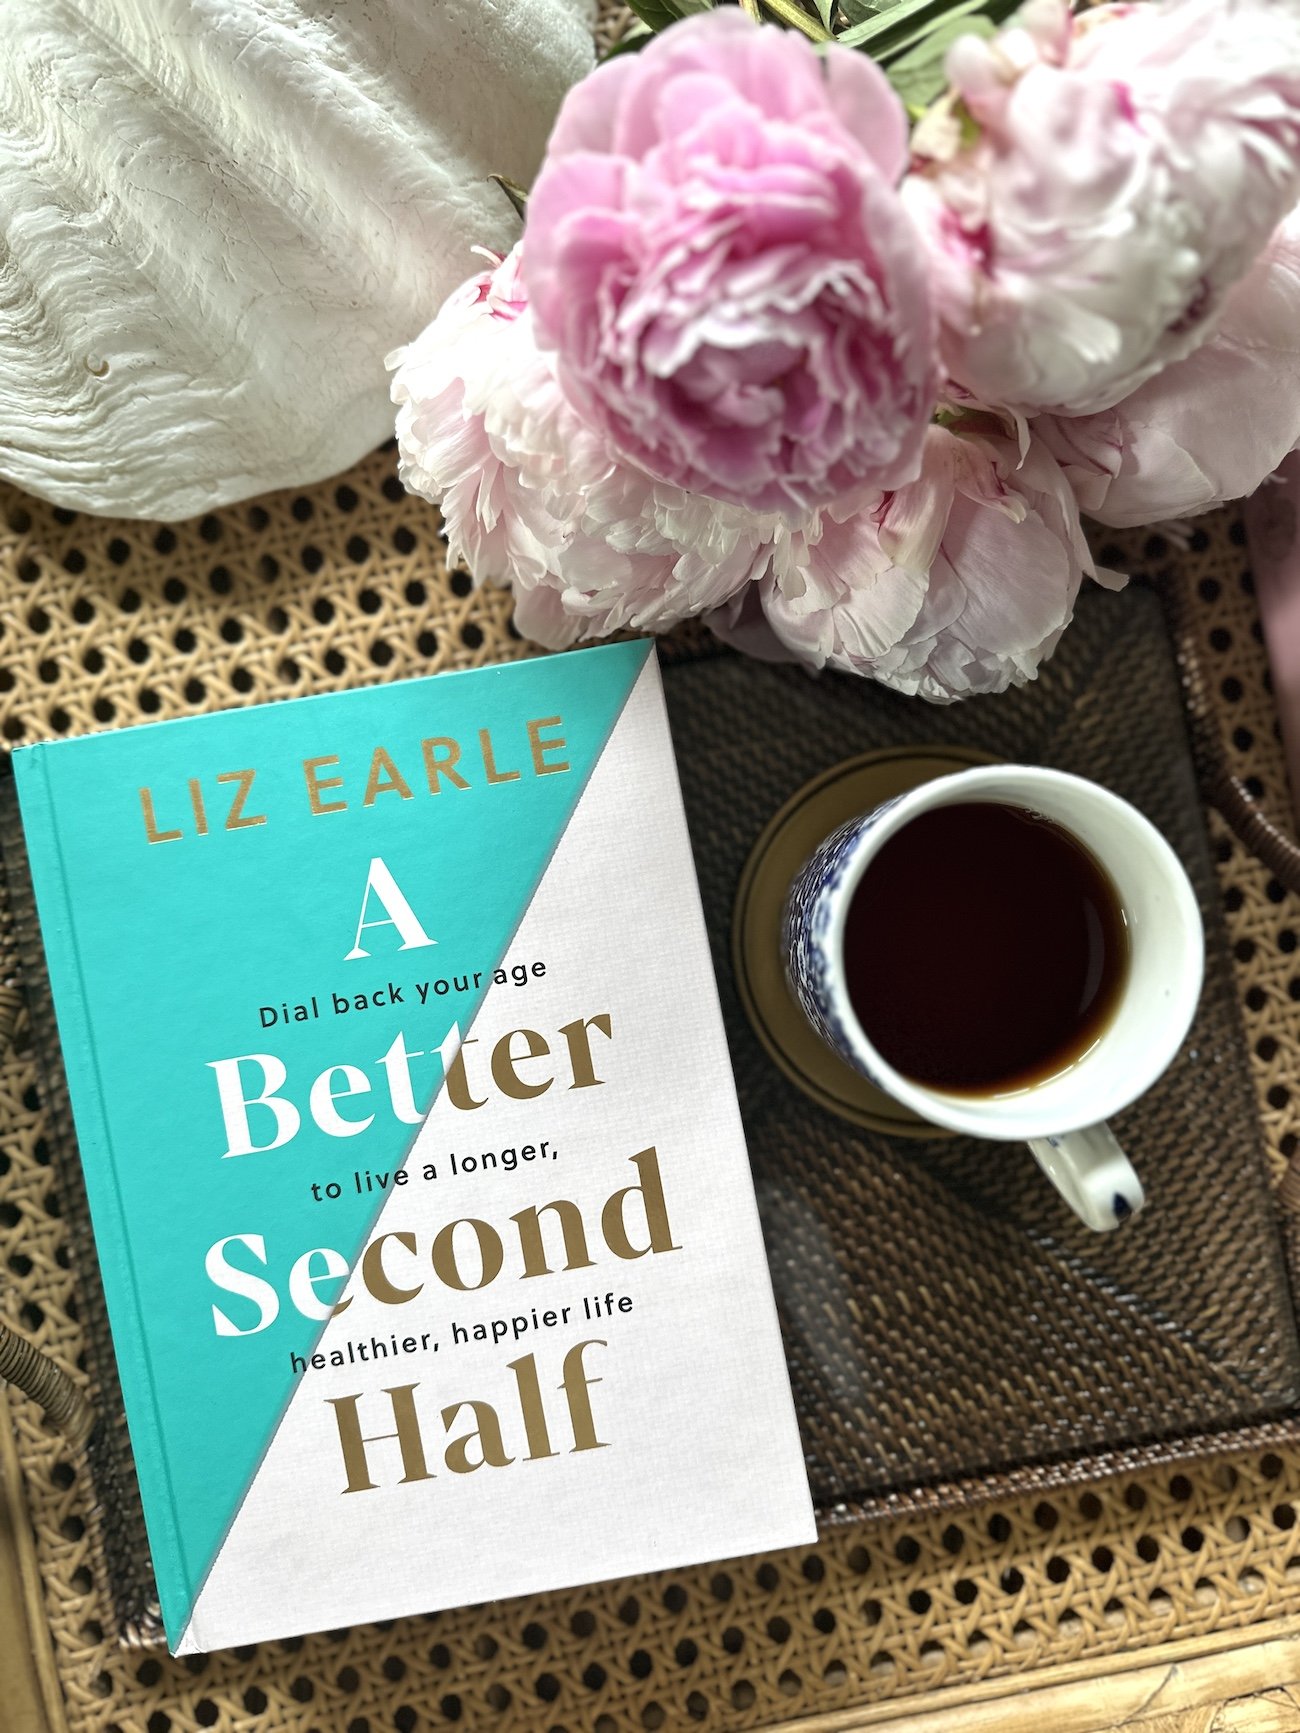 383: 11 Health & Beauty Secrets for a Better Second Half, as taught by Liz Earle